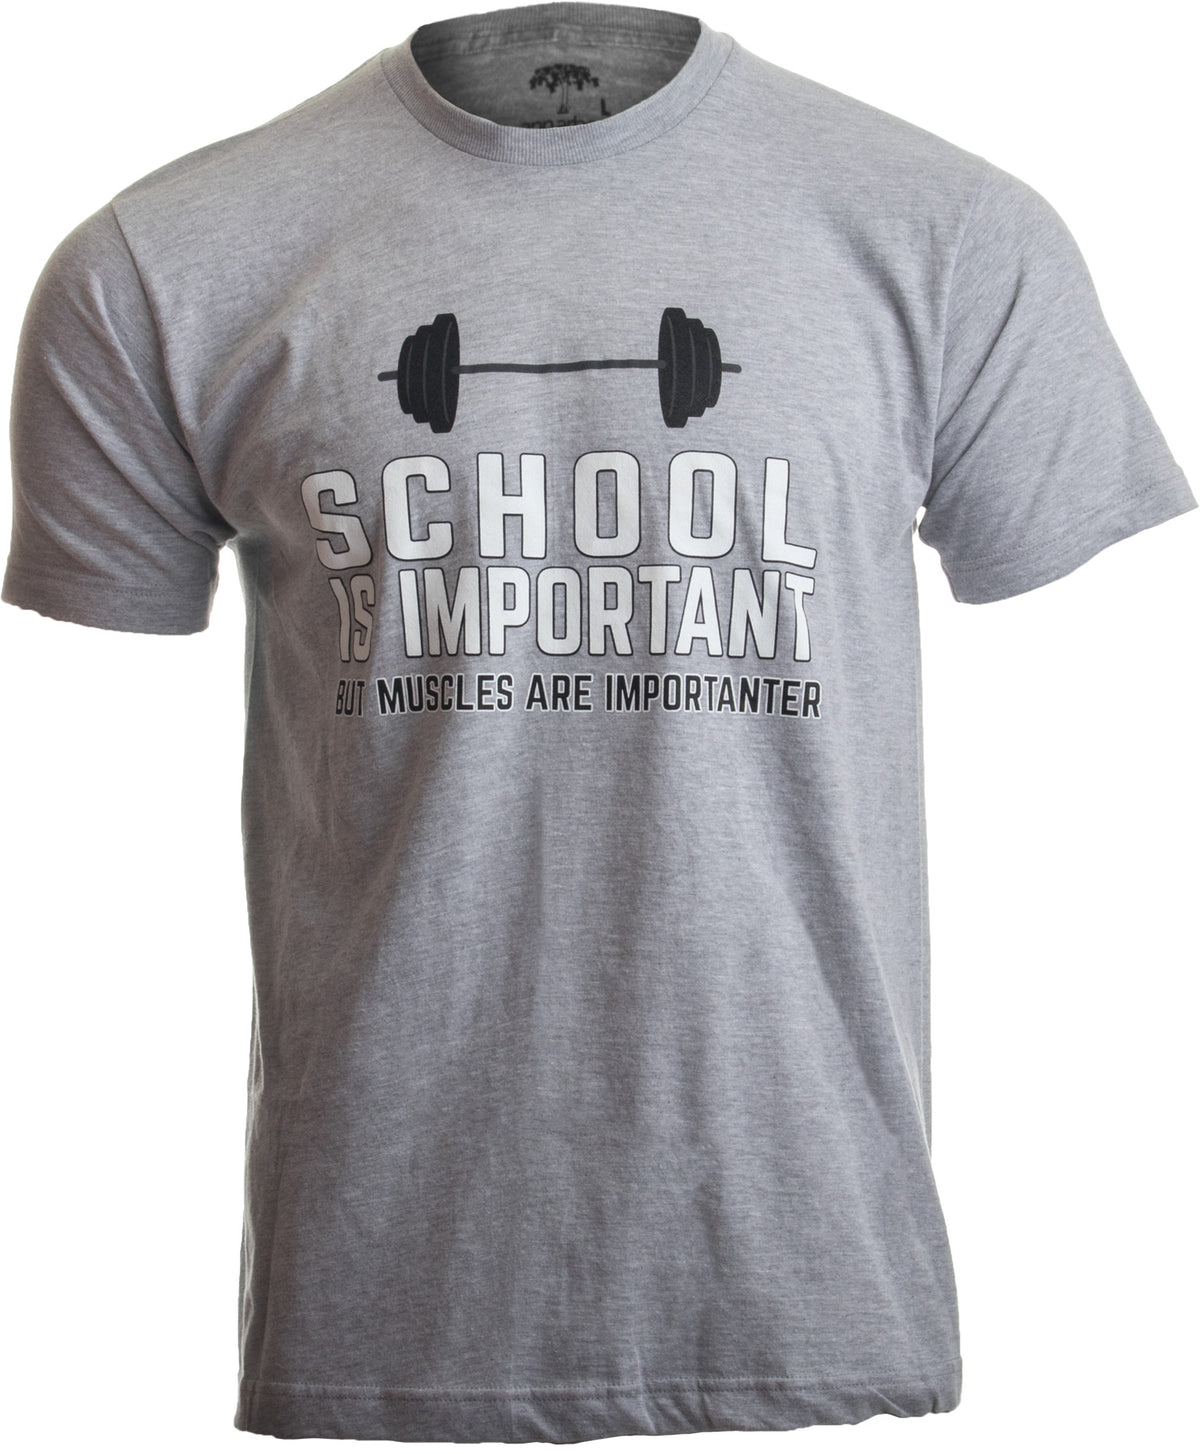 School is Important, but Muscles are Importanter | Funny Body Building T-shirt